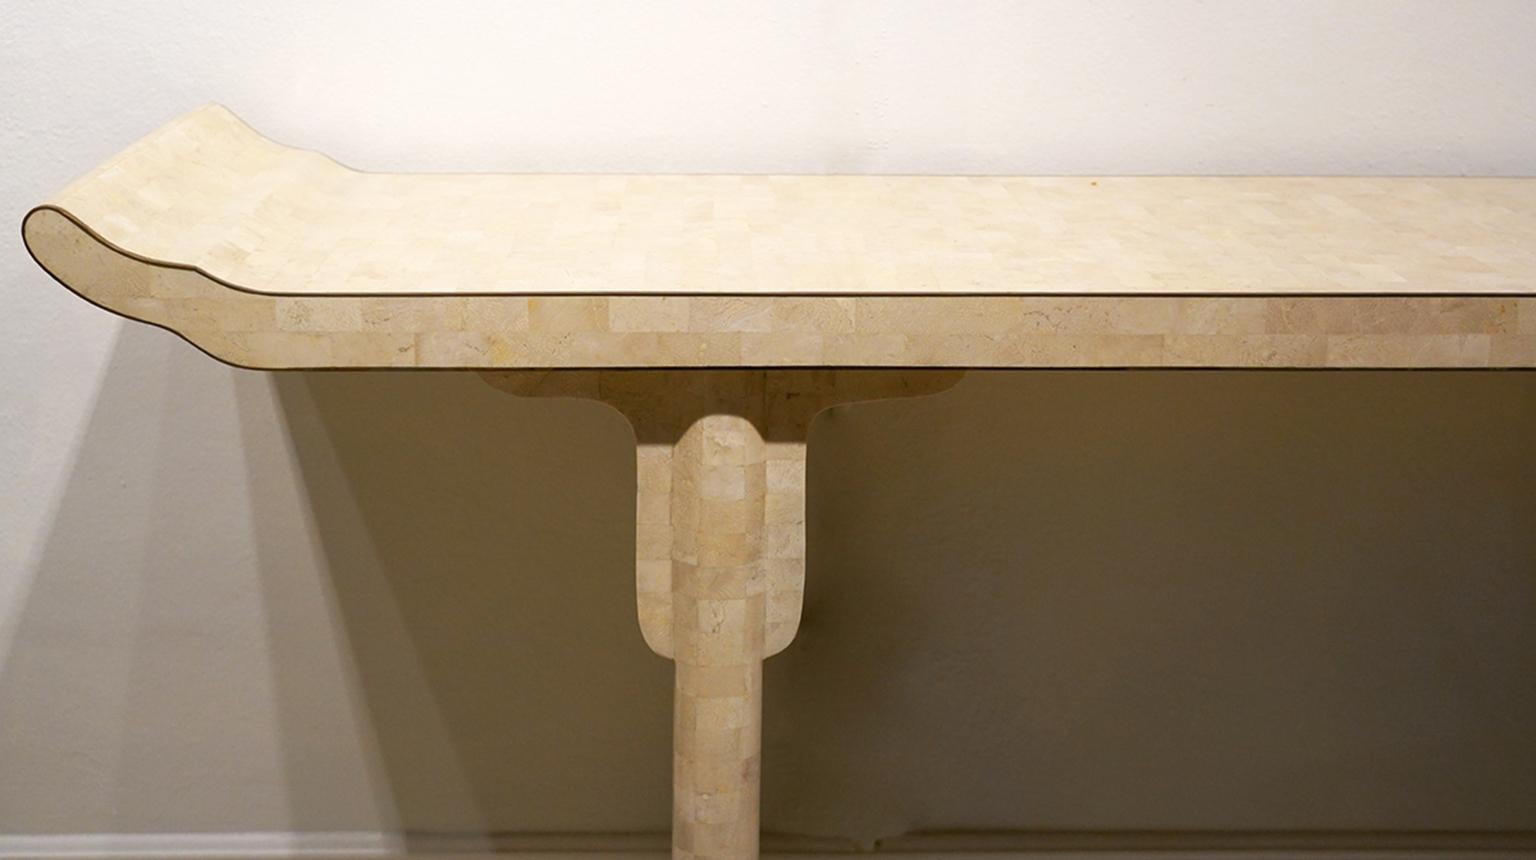 This pair of Maitland Smith style tesselated console tables are designed inspired by Chinese altar tables. They are covered by a mosaic of small travertine marble tiles and the tops elegantly edged with brass. Top craftsmanship.